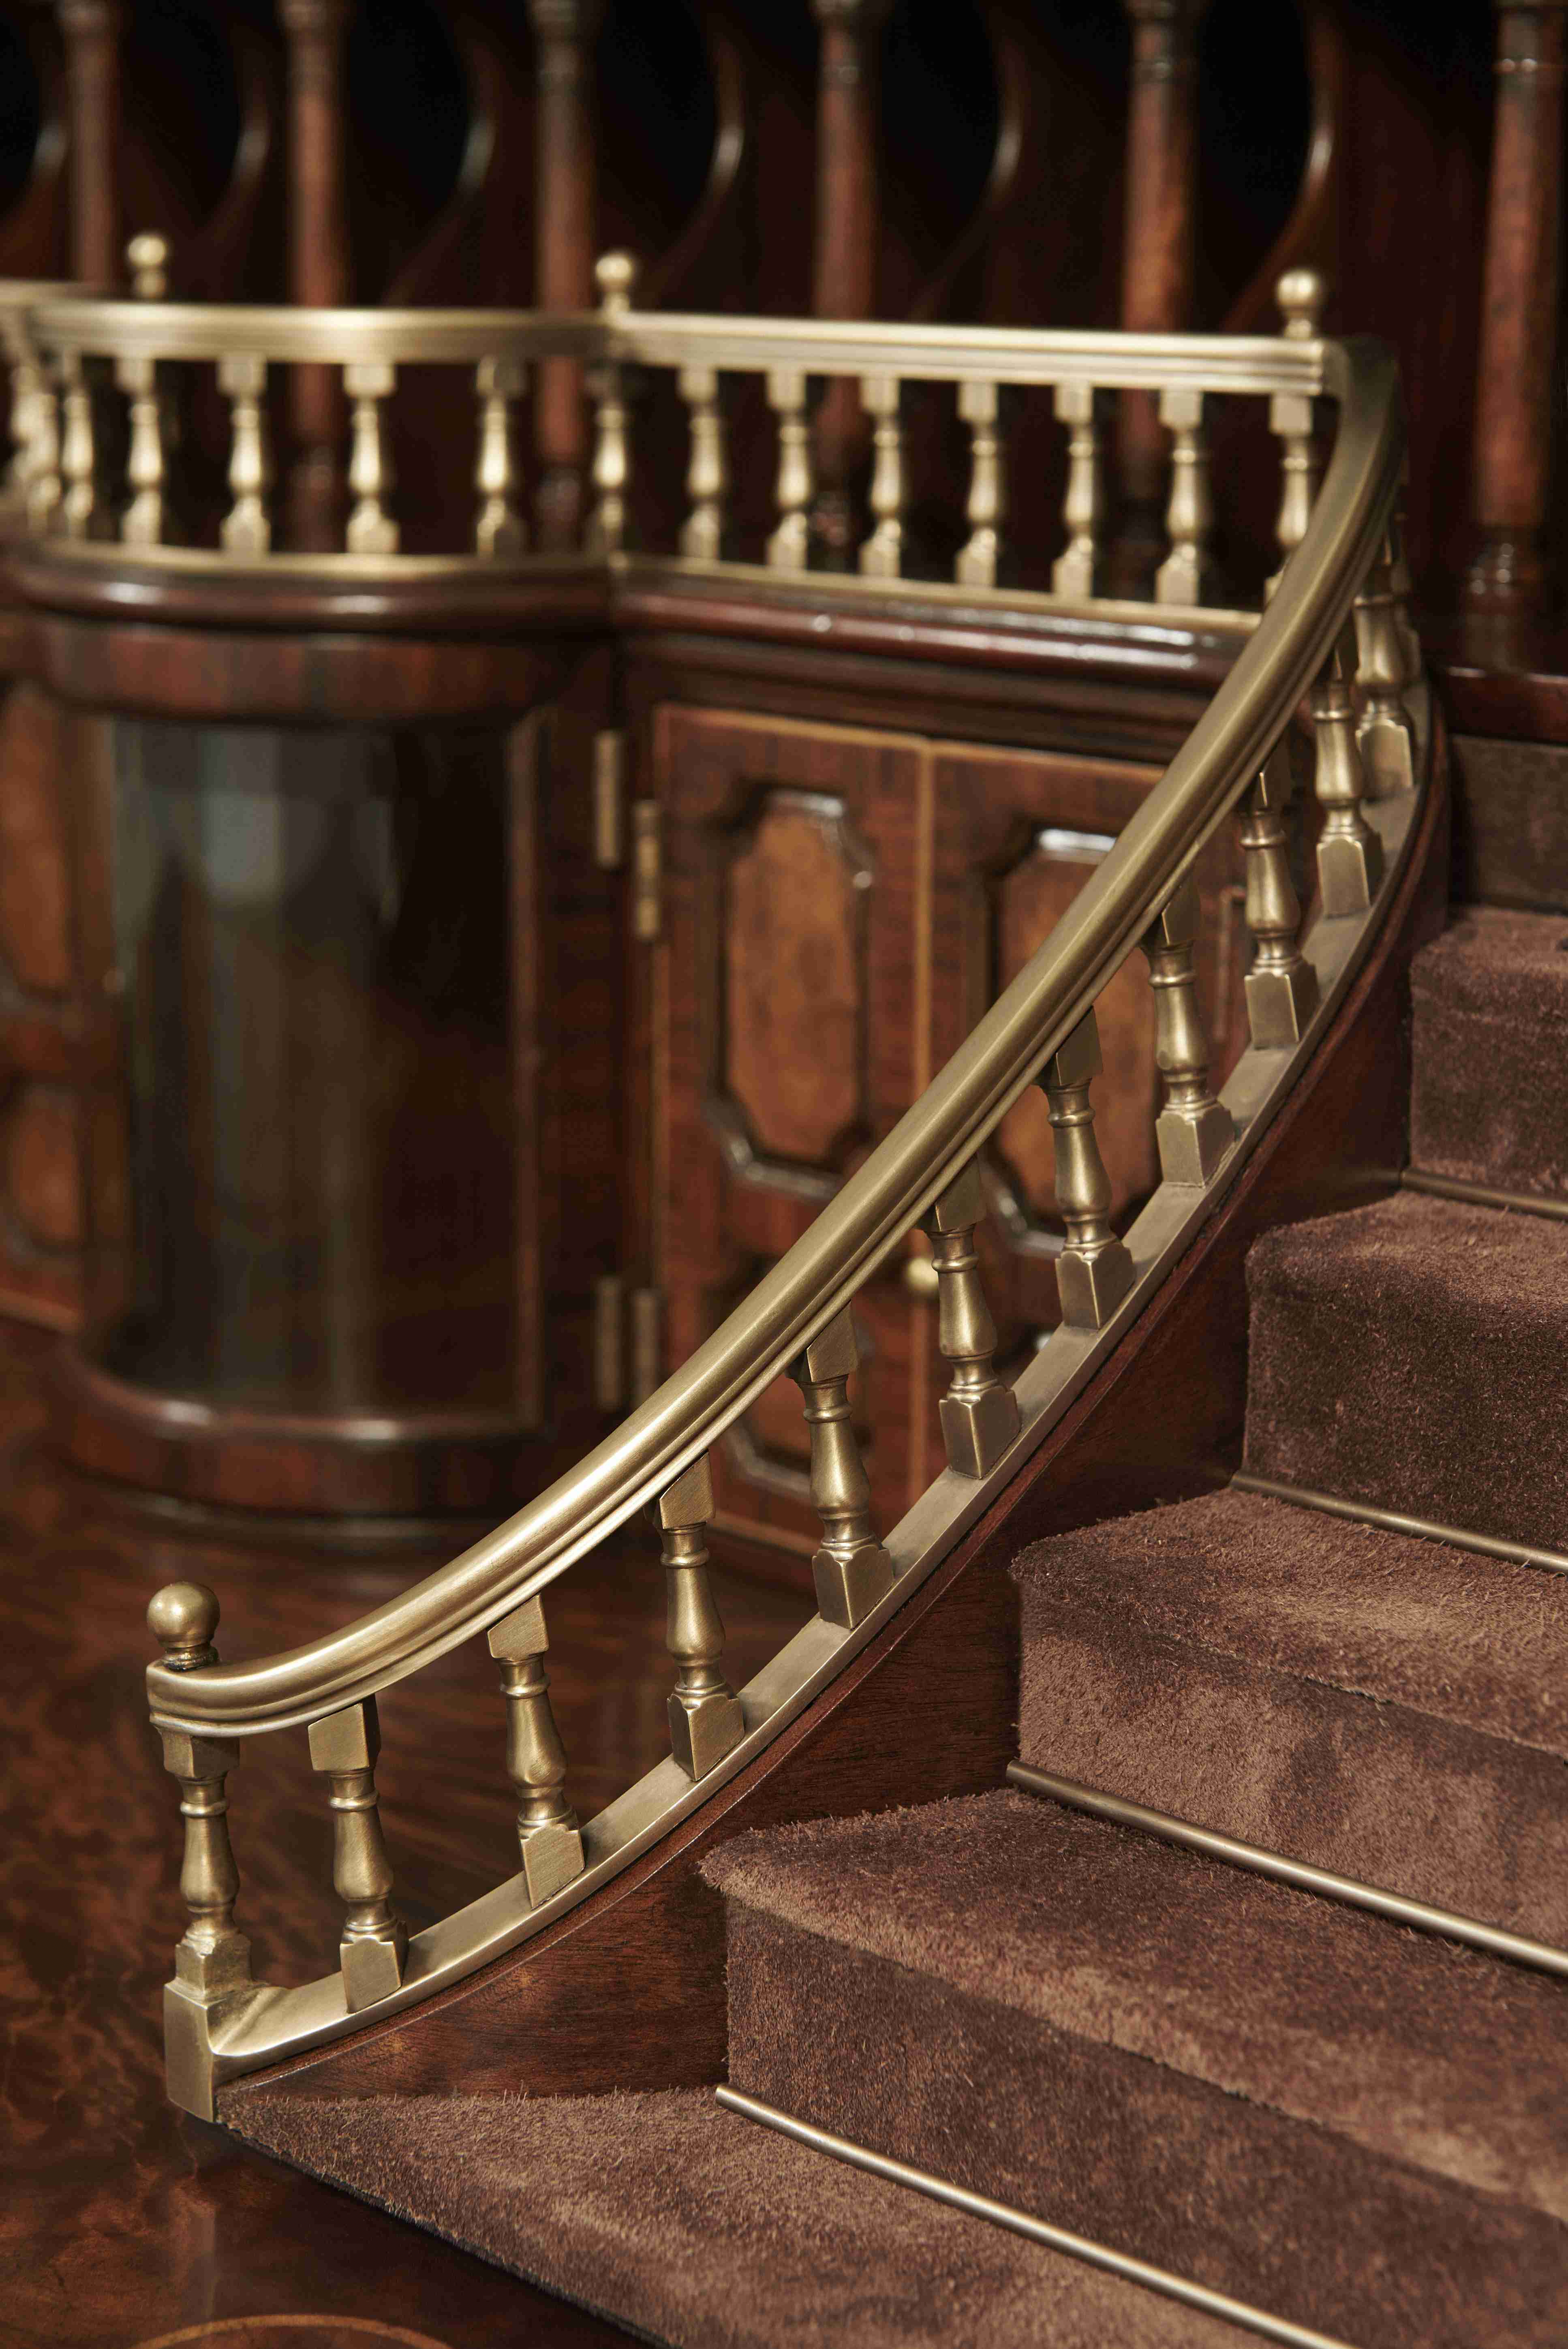 THE GRAND STAIRCASE FALL FRONT DESK & BUREAUX